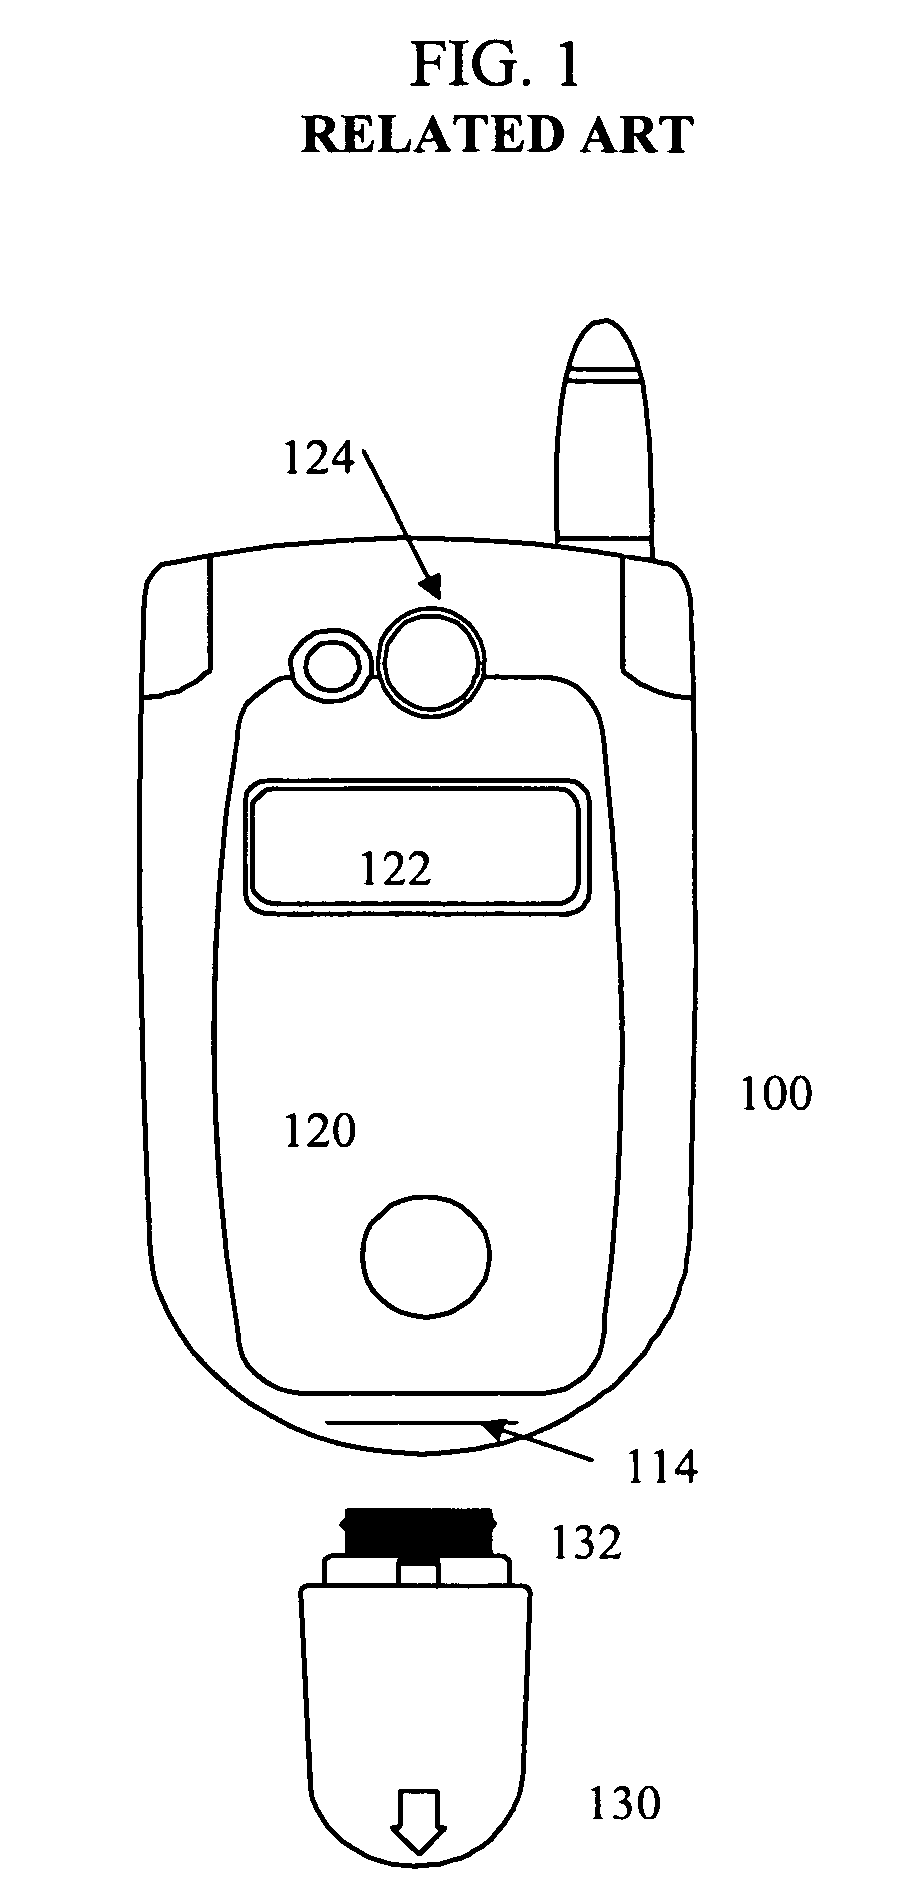 Application module for a personal communication device